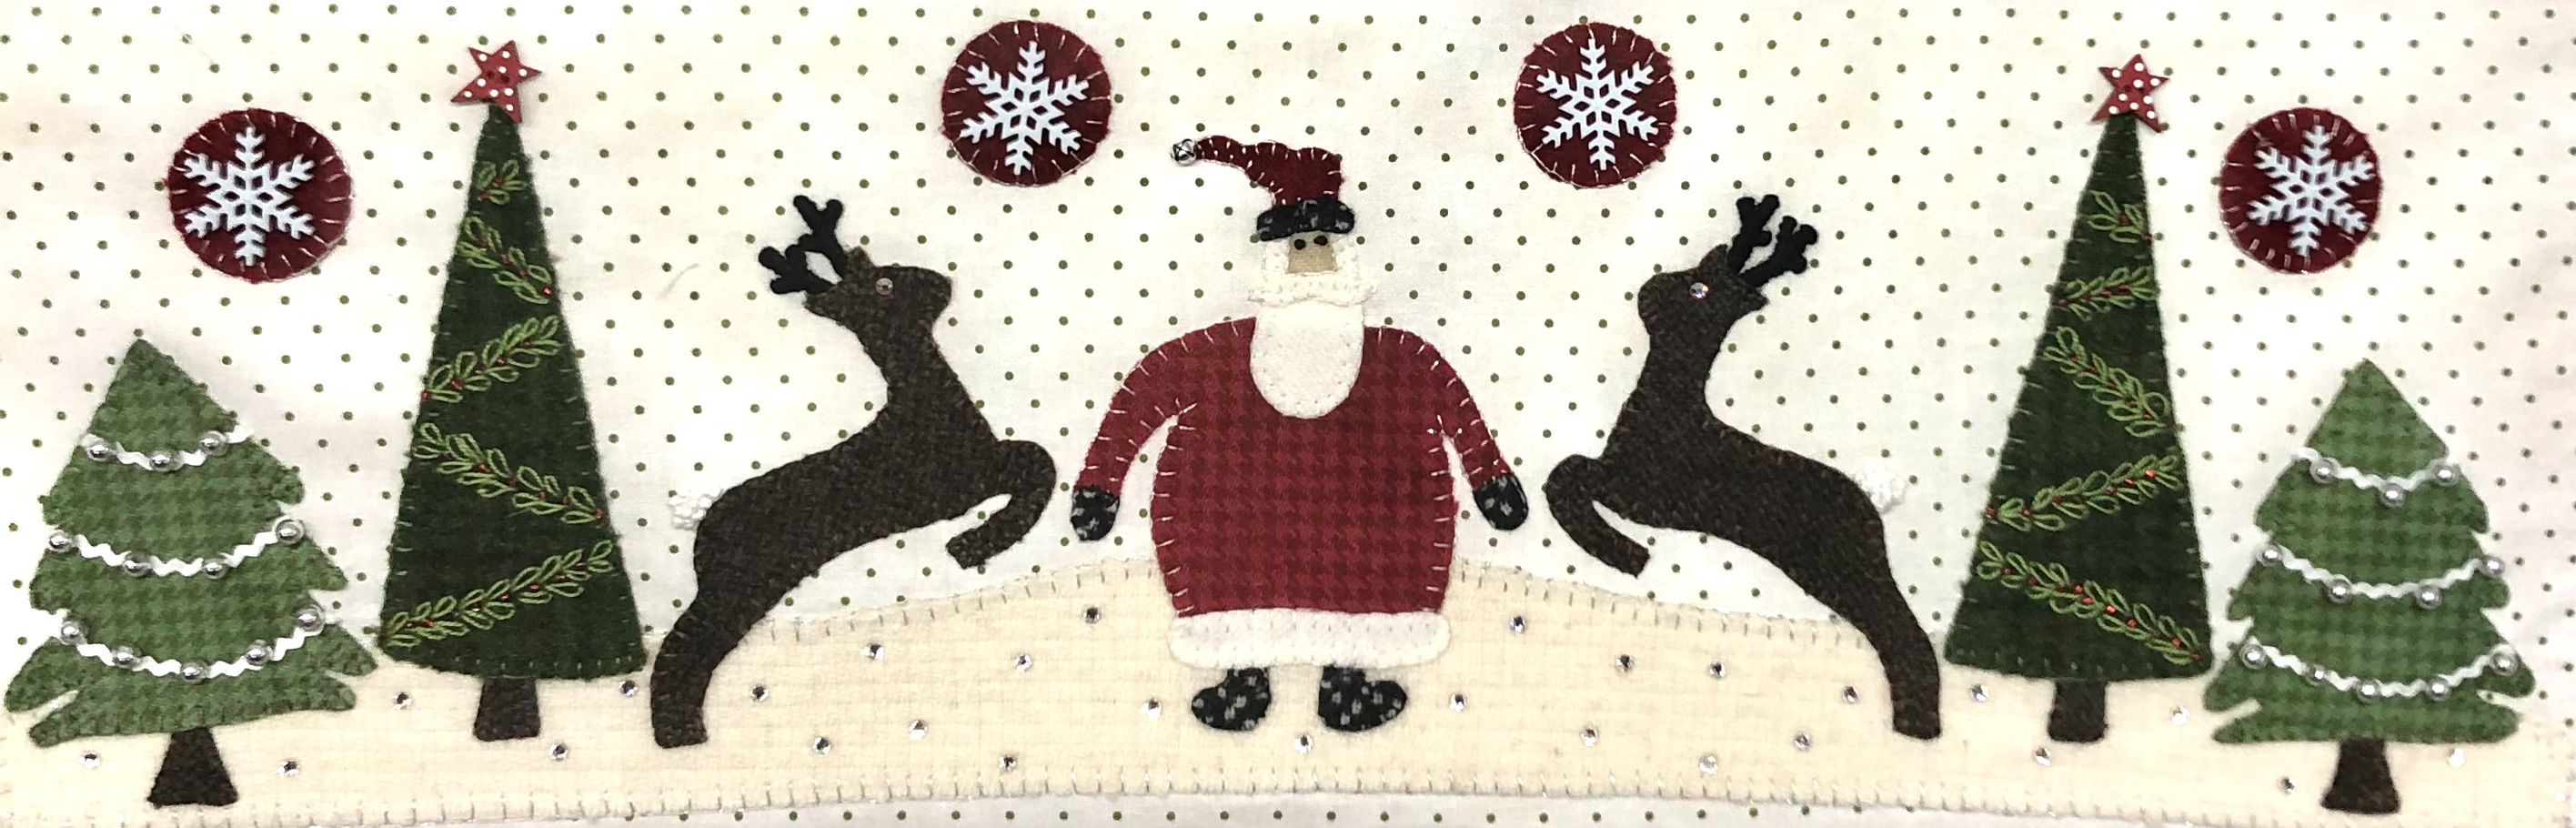 Mary Jane & Friends - The Countdown to the Holidays Ladies -  BORDER BLOCK 2 - SANTA'S ARRIVAL PATTERN DIGITAL DOWNLOAD